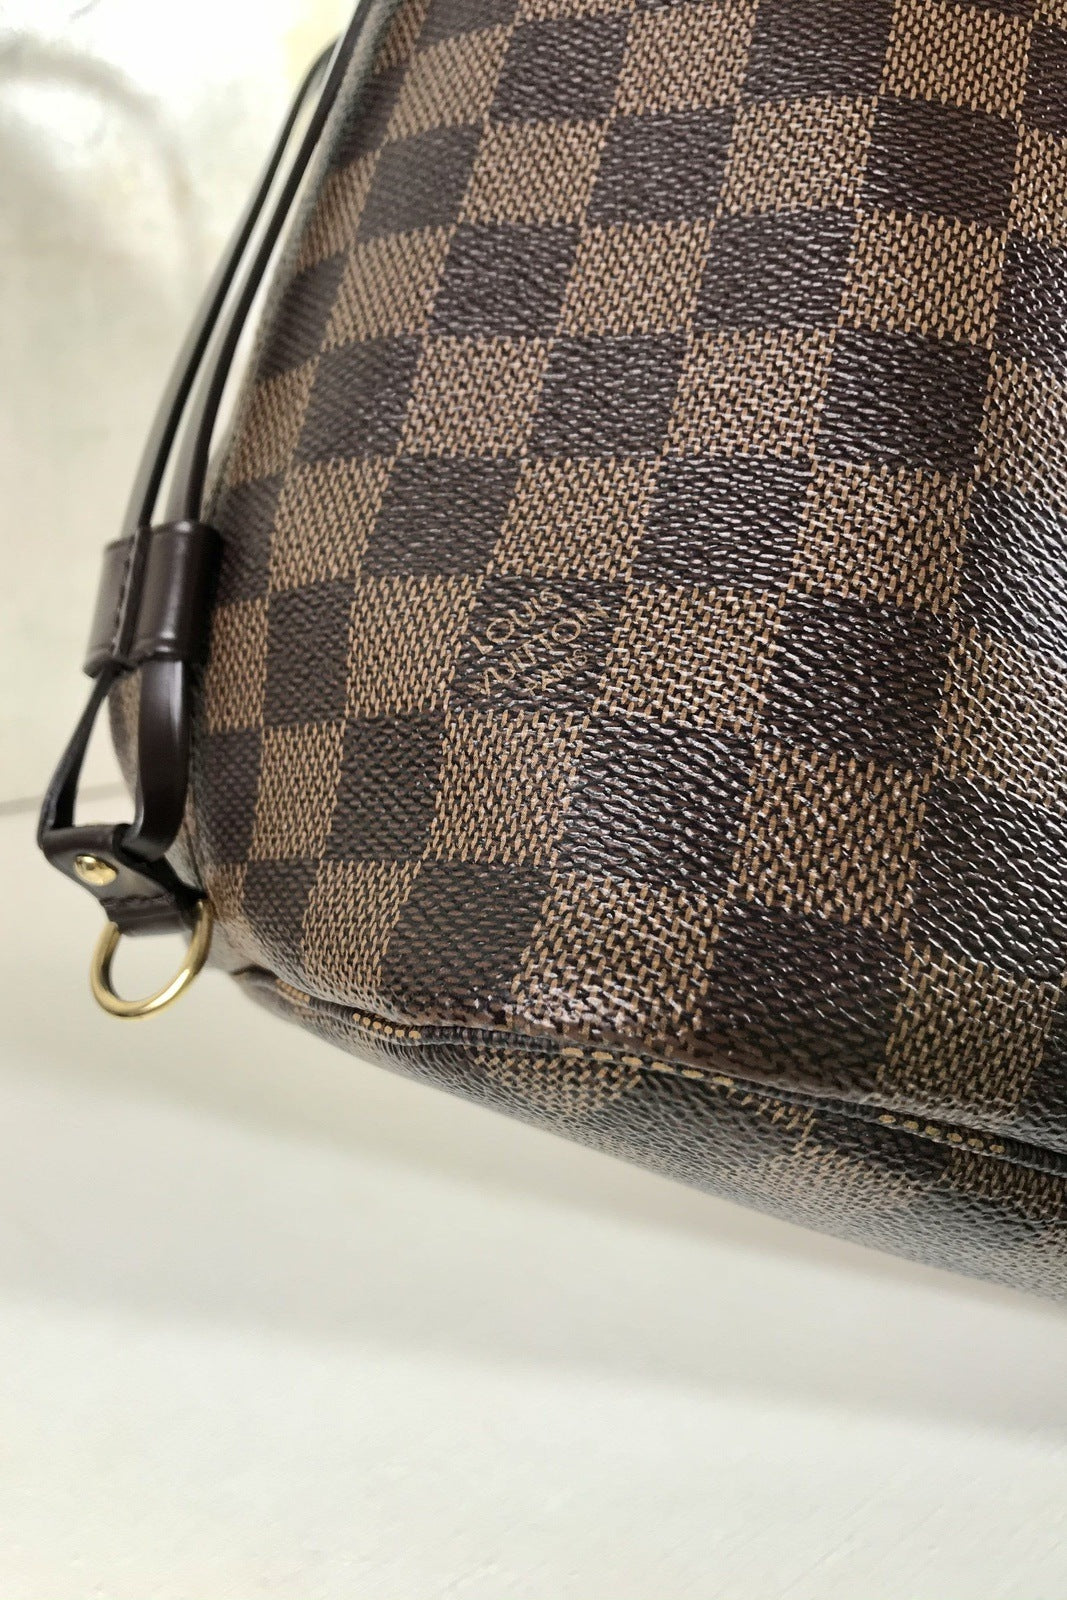 Louis Vuitton Neverfull Mm Damier Ebene Rose Ballerine Pink - $1125 (26%  Off Retail) - From Crystle